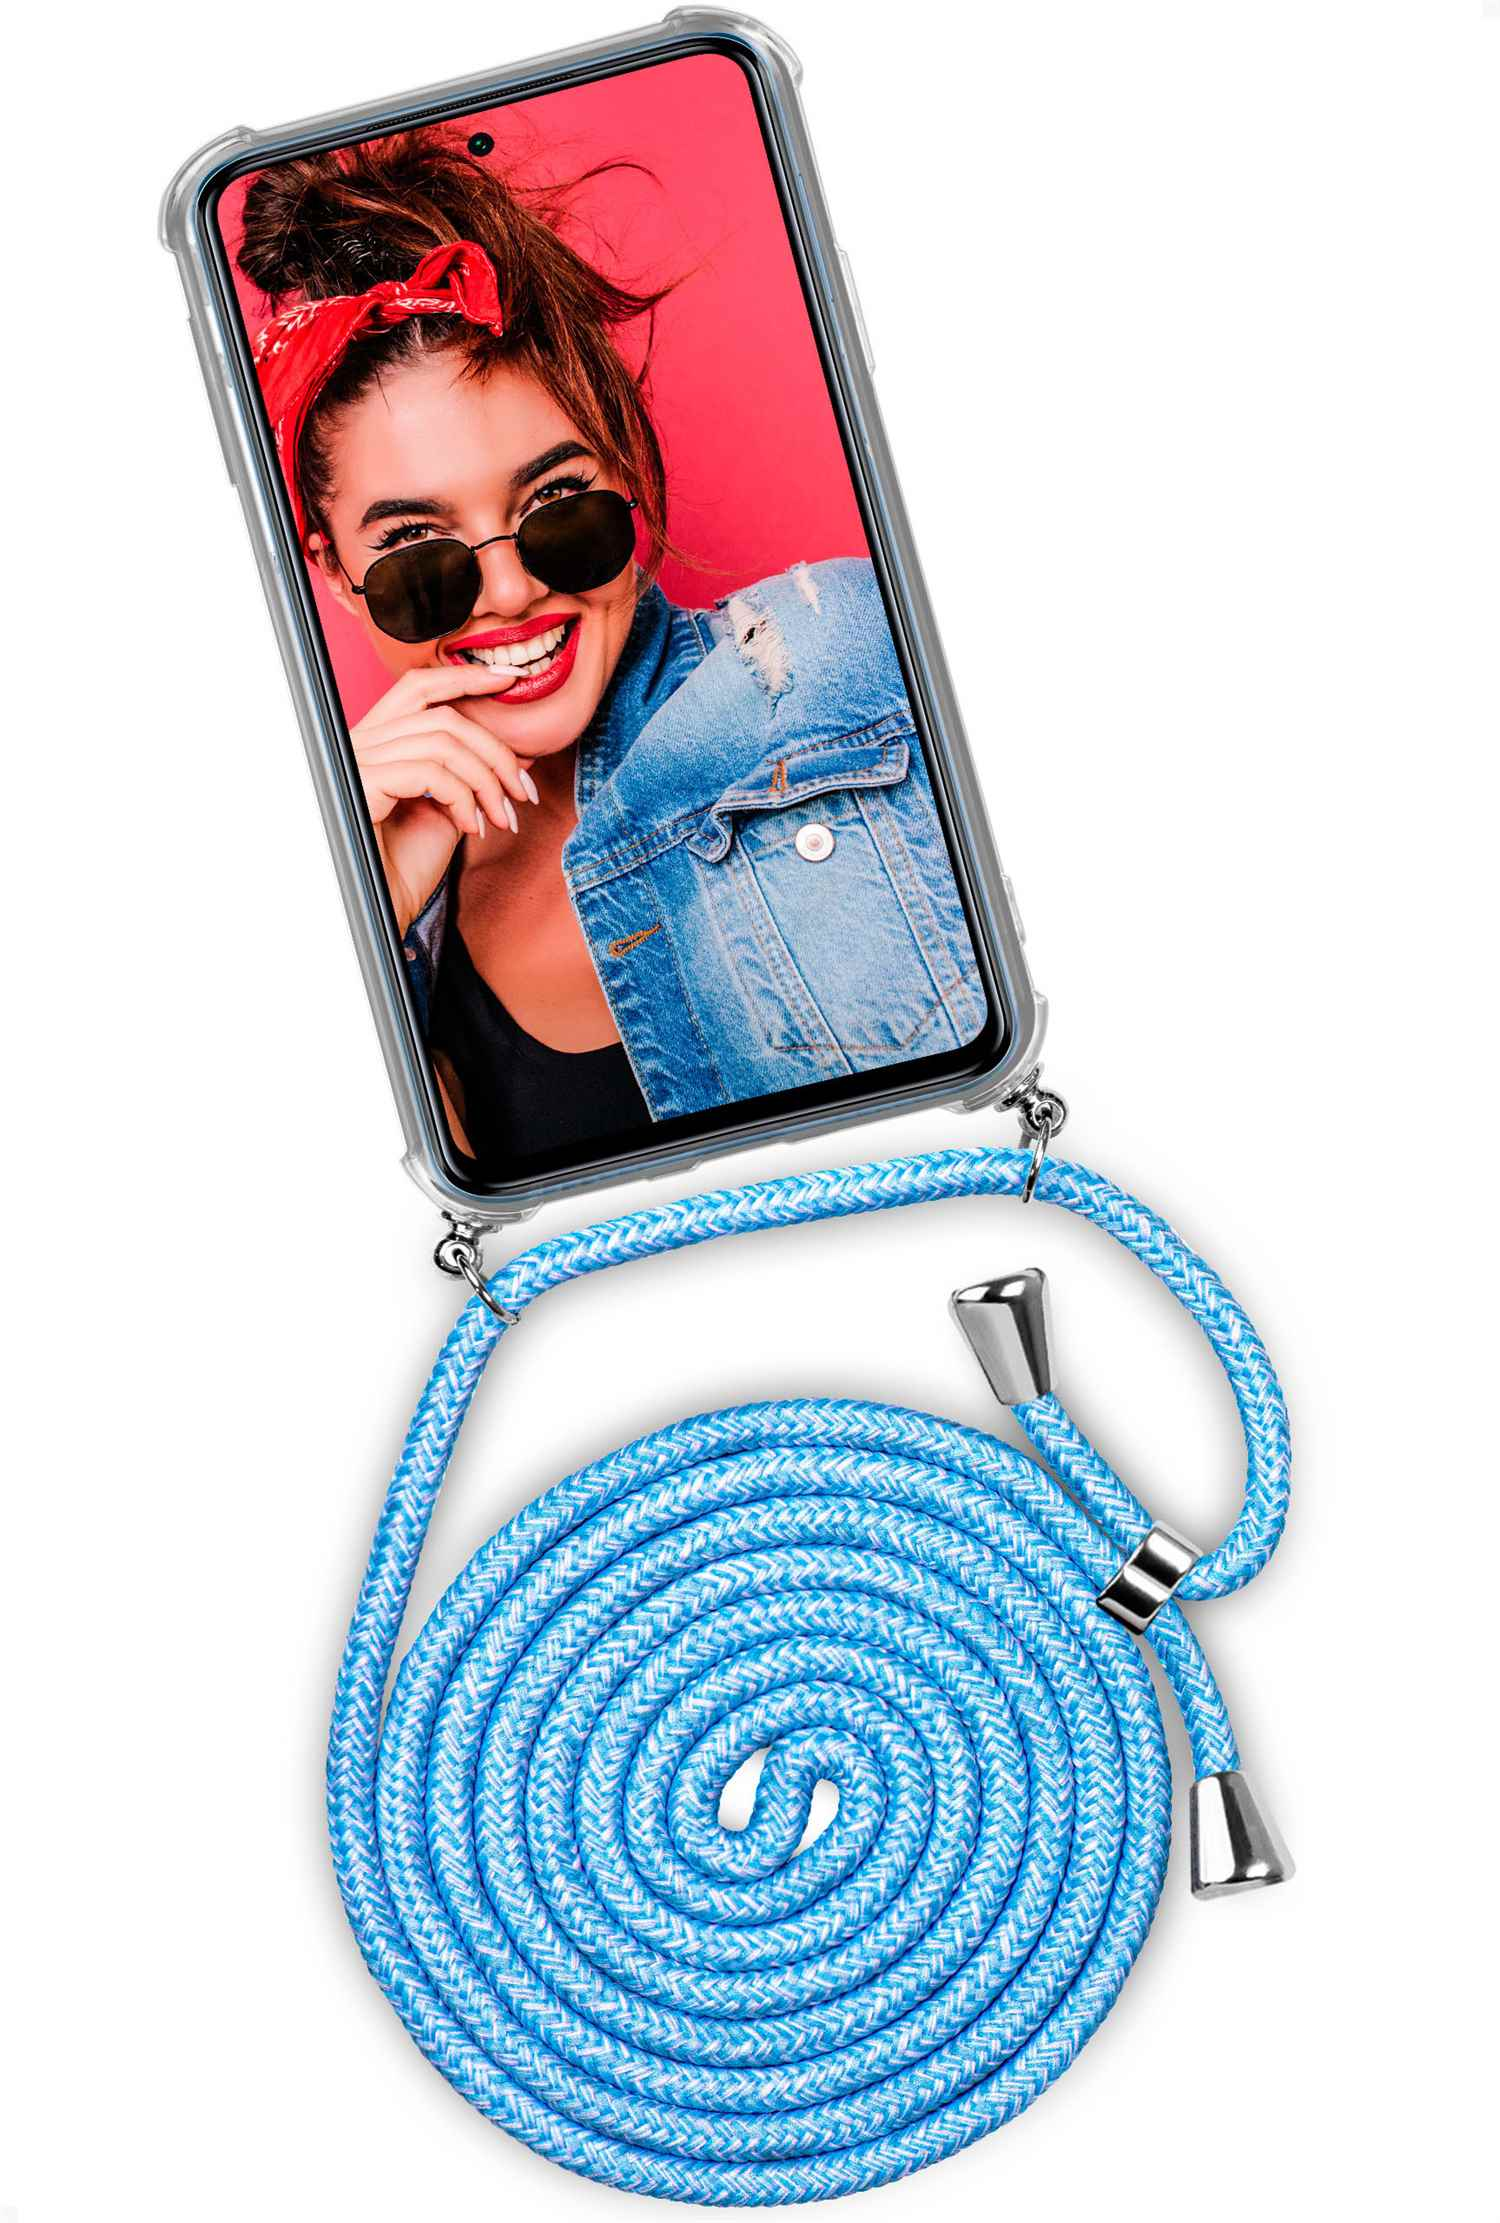 Redmi Jeans ONEFLOW Note Twist Chilly Pro, Xiaomi, 9 Backcover, Case, (Silber)